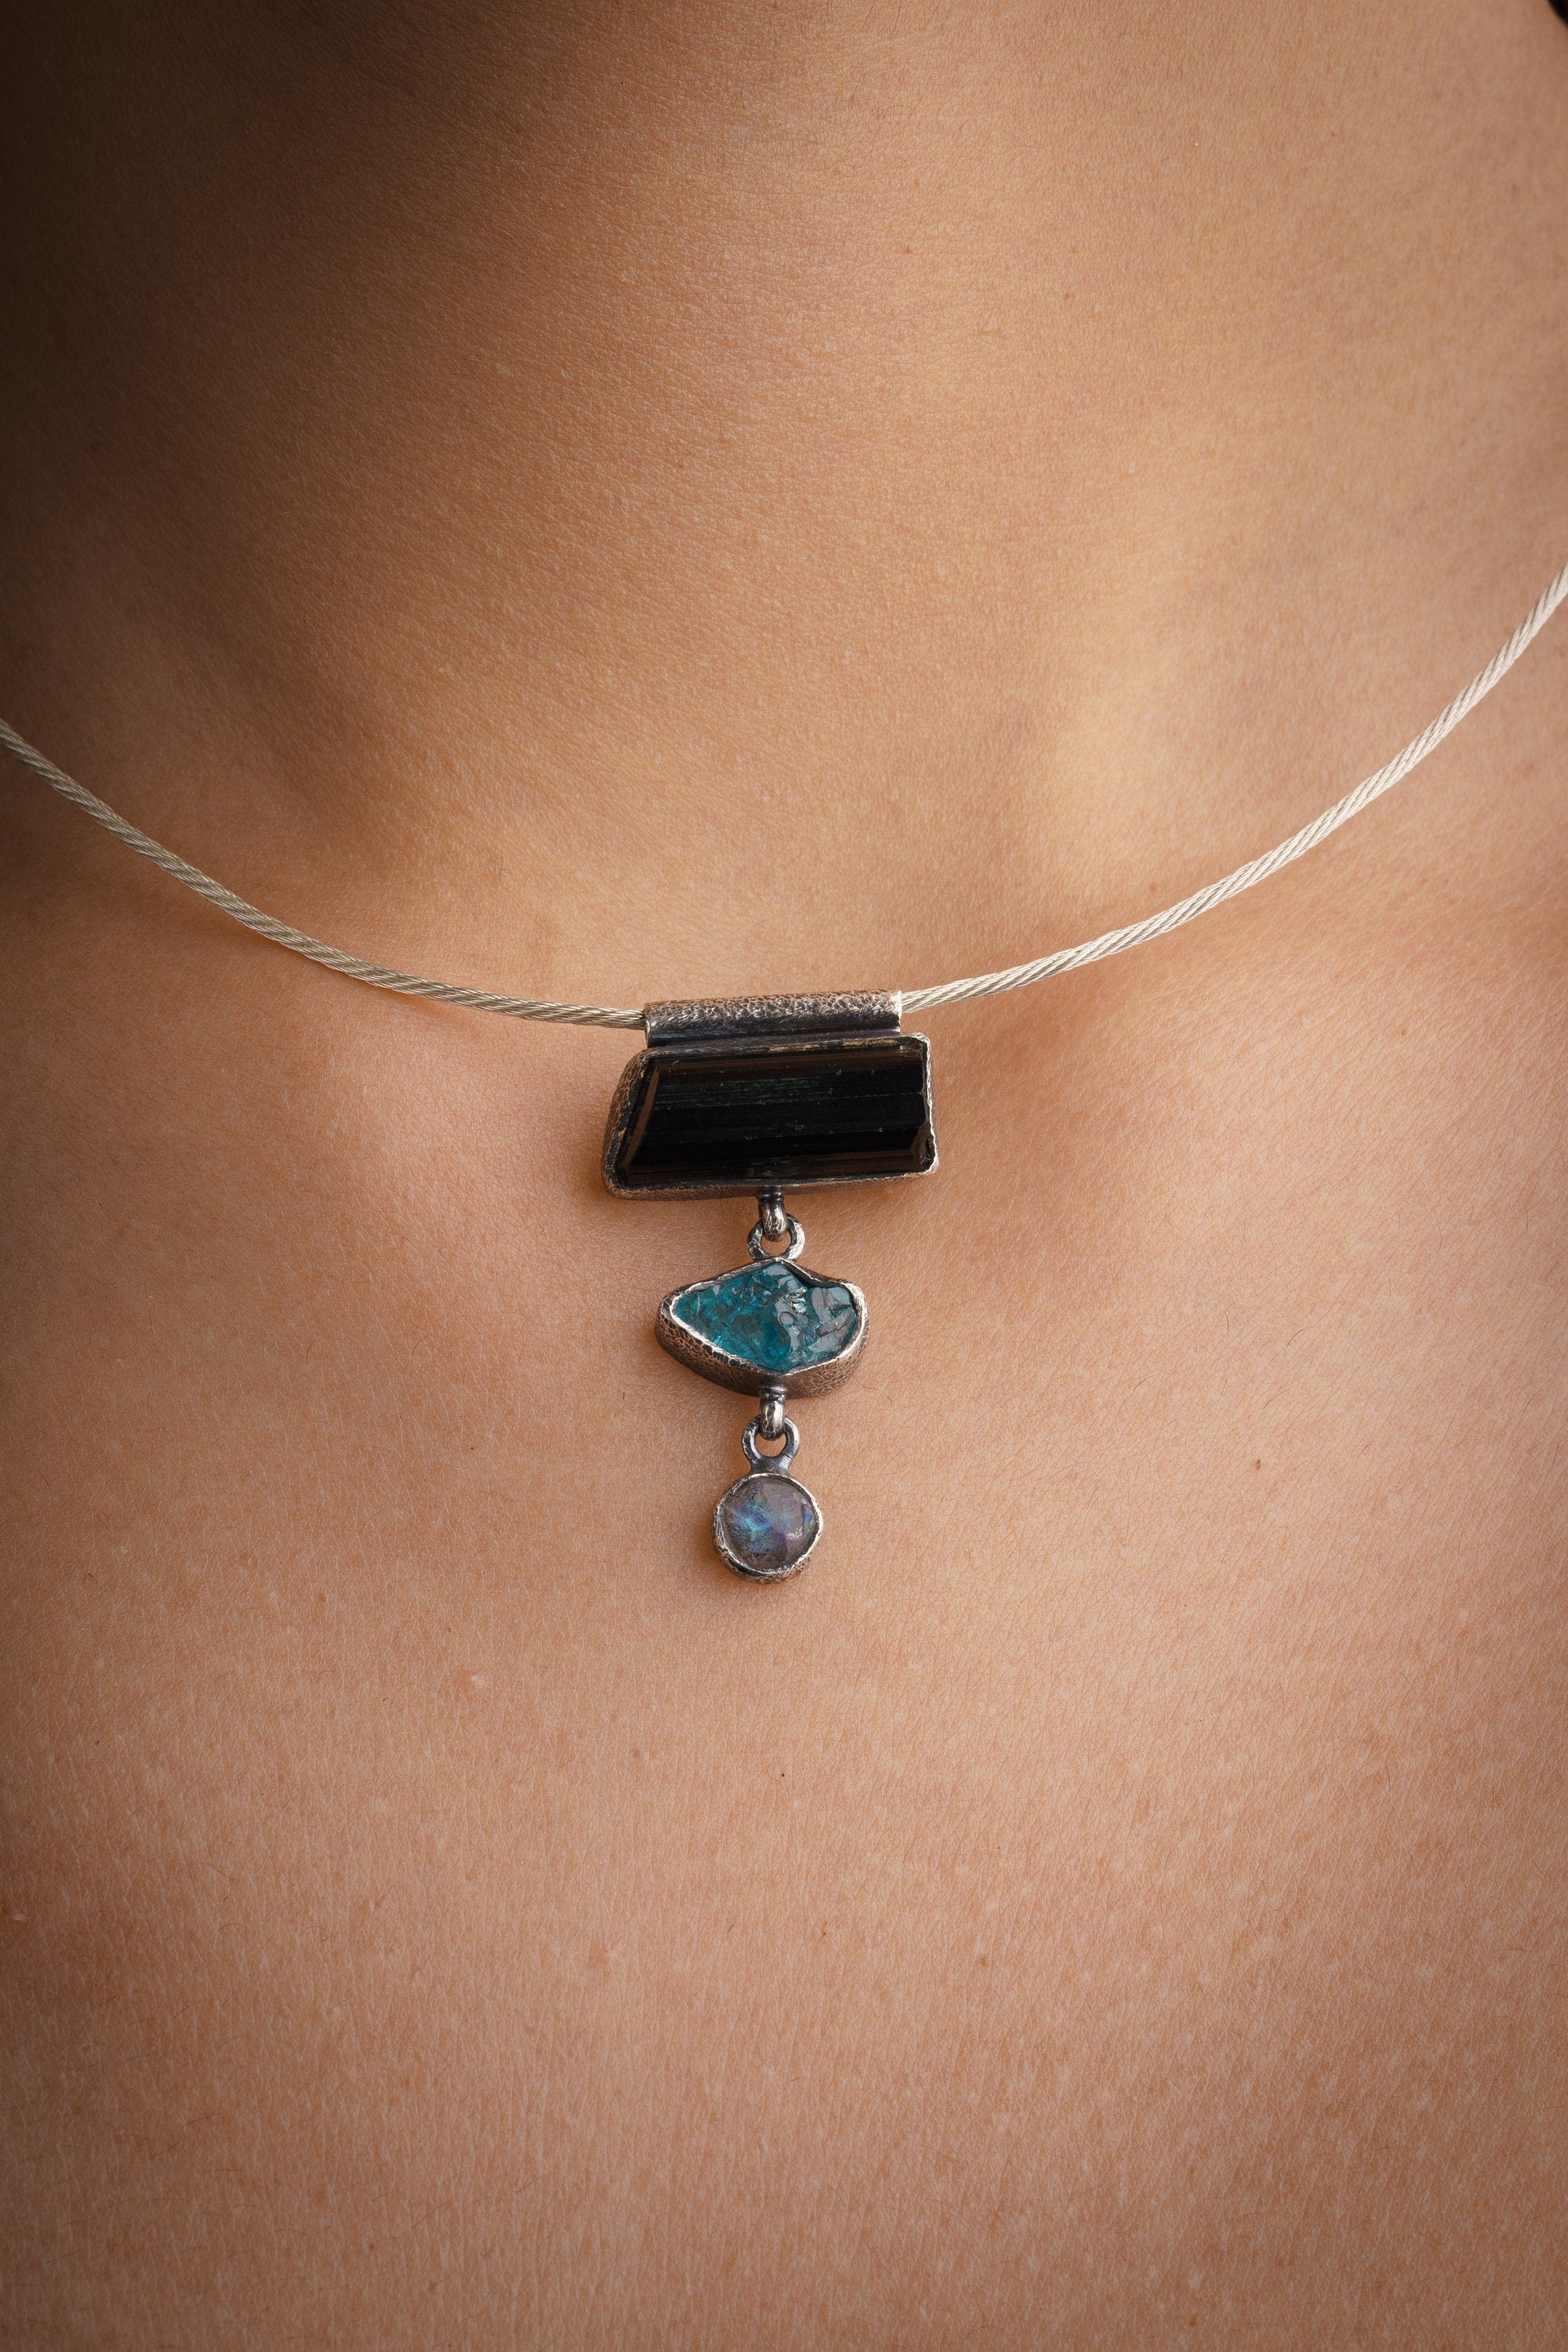 One Black Tourmaline, Blue Gem Apatite and Fiery Labradorite - Stack Pendant -Textured & oxidised - 925 Sterling Silver - Crystal Necklace